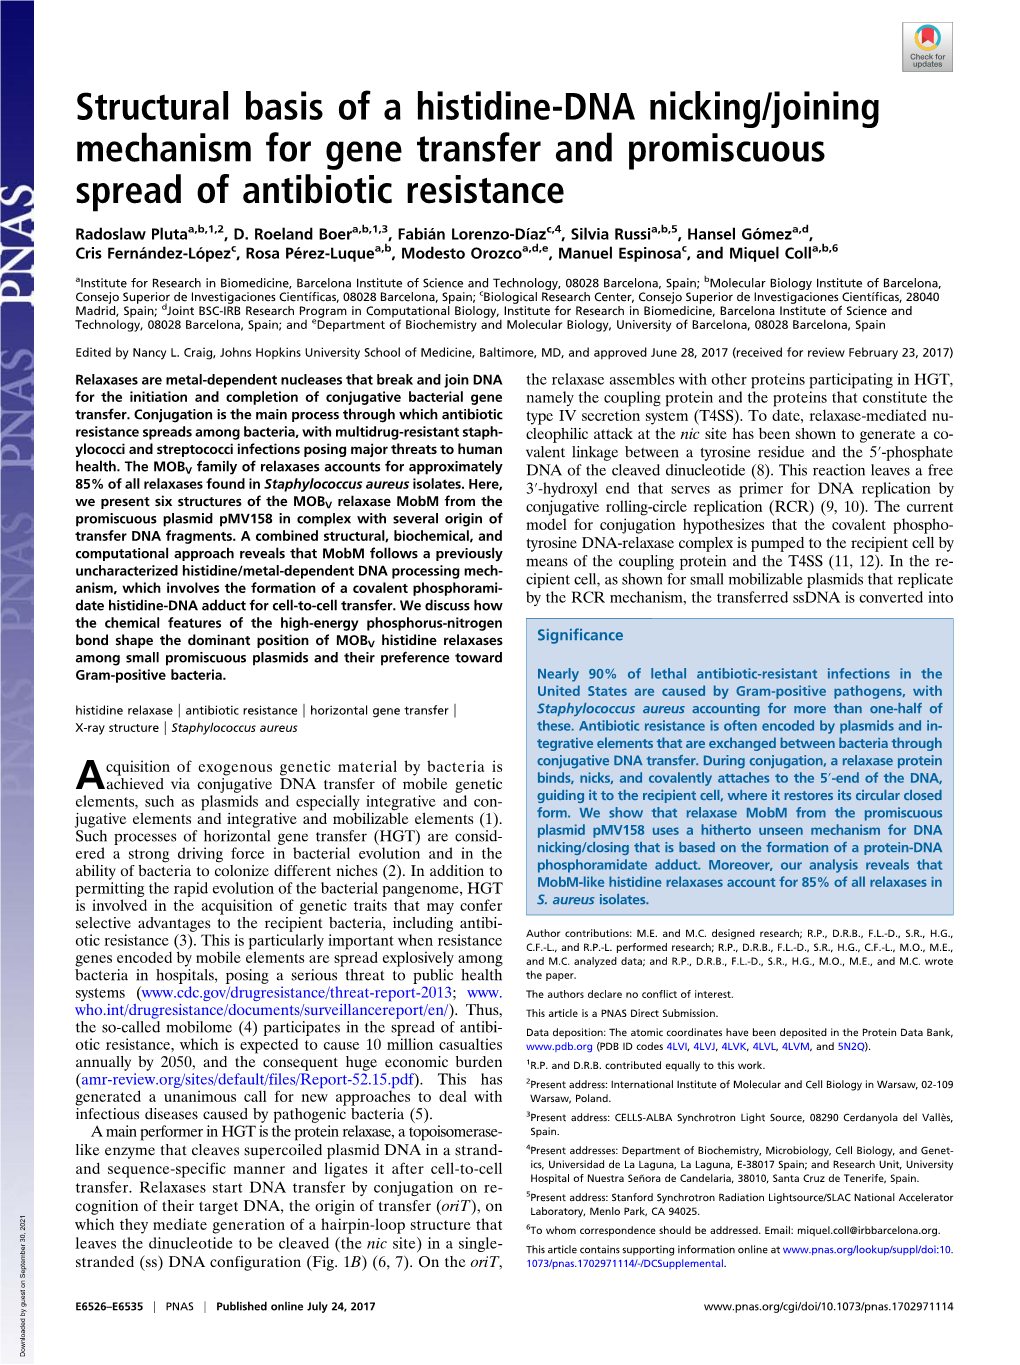 Structural Basis of a Histidine-DNA Nicking/Joining Mechanism for Gene Transfer and Promiscuous Spread of Antibiotic Resistance